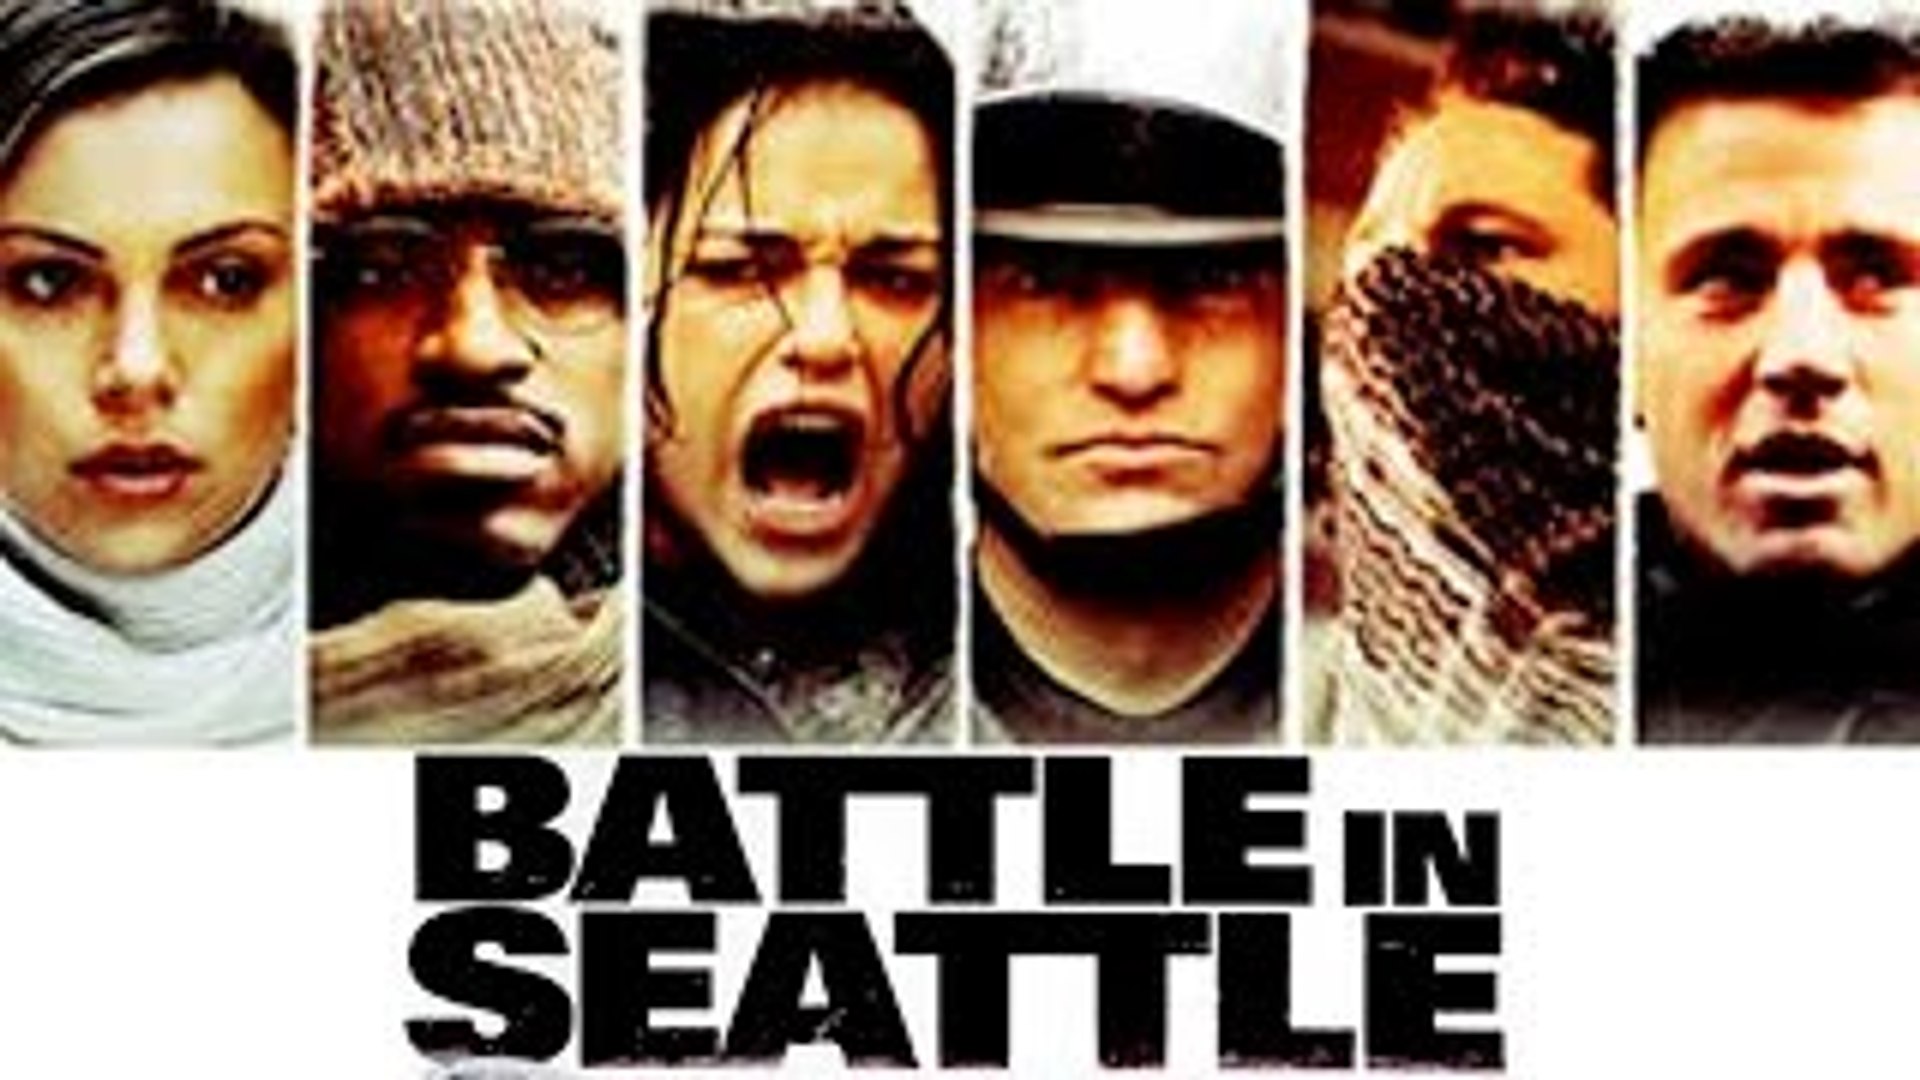 Hollywood Action Movies - Battle in Seattle Full Movies - Latest Hollywood Movies 2015 in